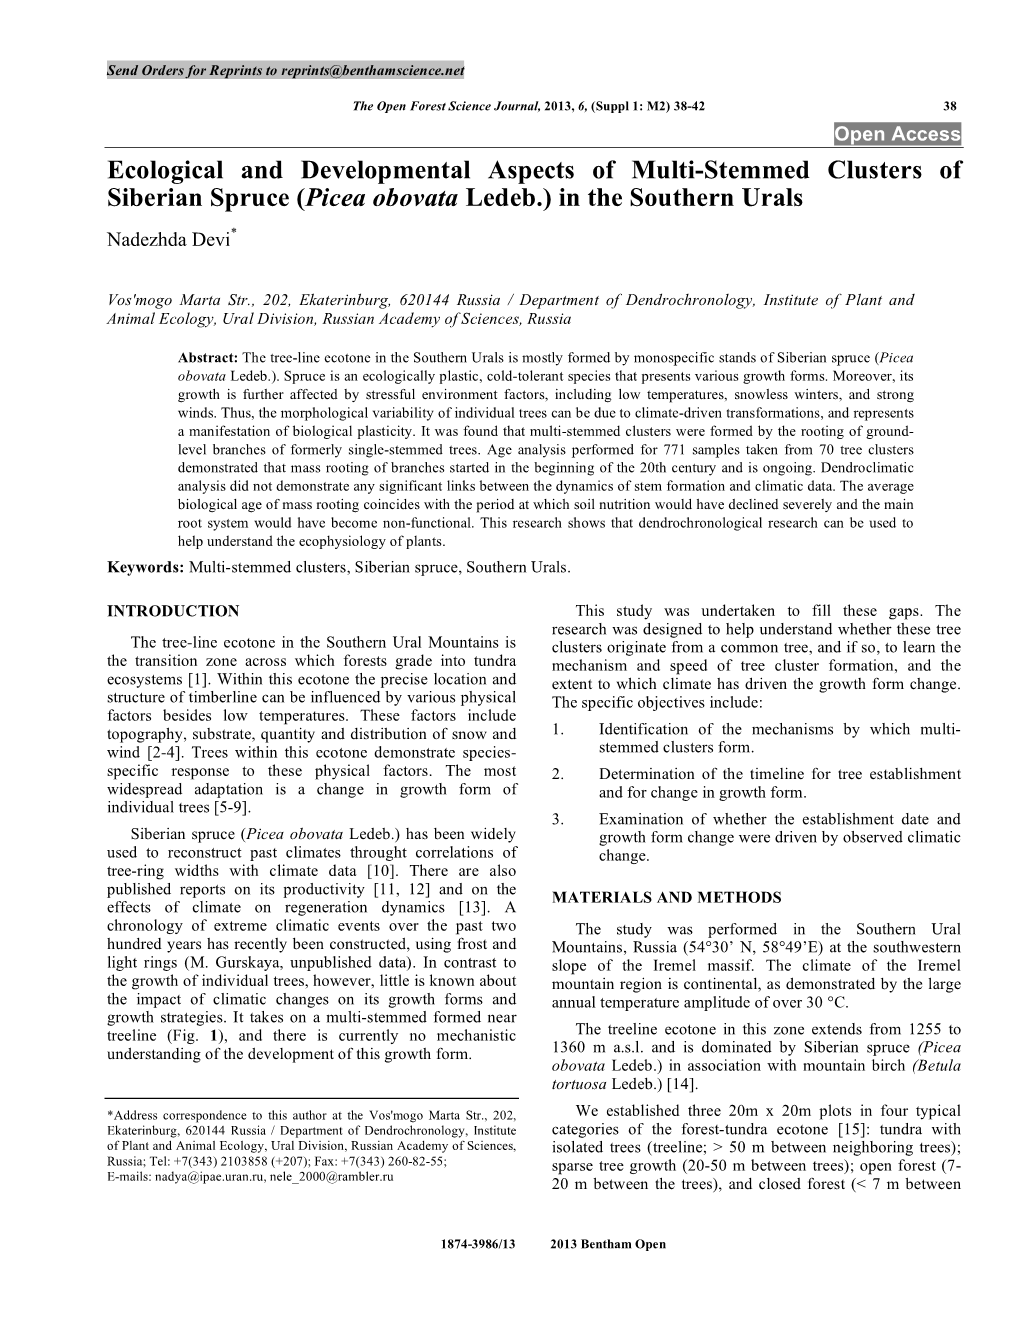 Ecological and Developmental Aspects of Multi-Stemmed Clusters of Siberian Spruce (Picea Obovata Ledeb.) in the Southern Urals Nadezhda Devi*